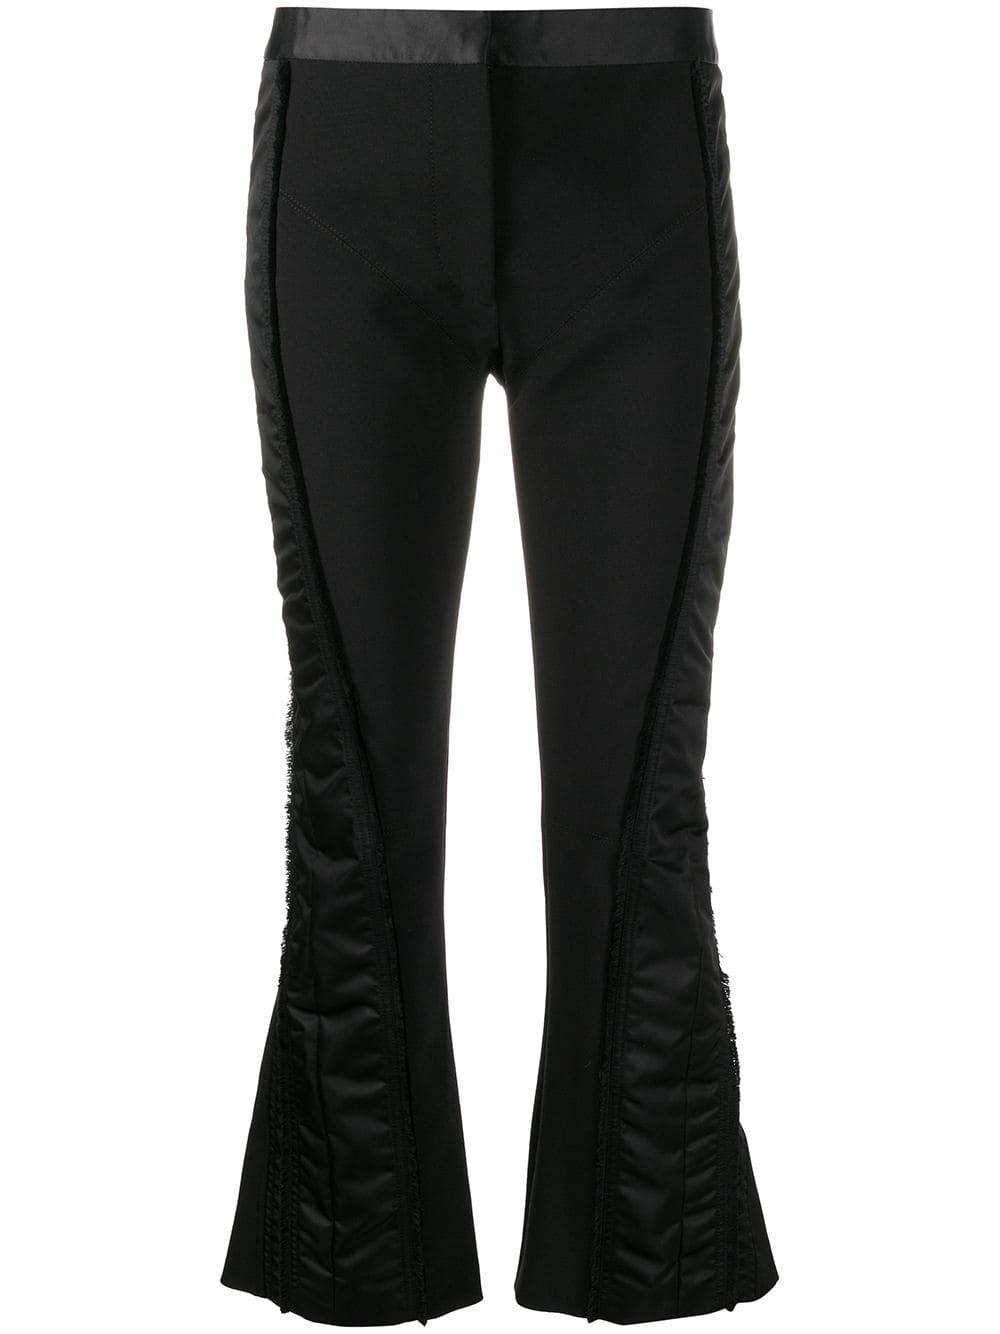 Mugler Synthetic Contrast Panel Trousers in Black - Lyst